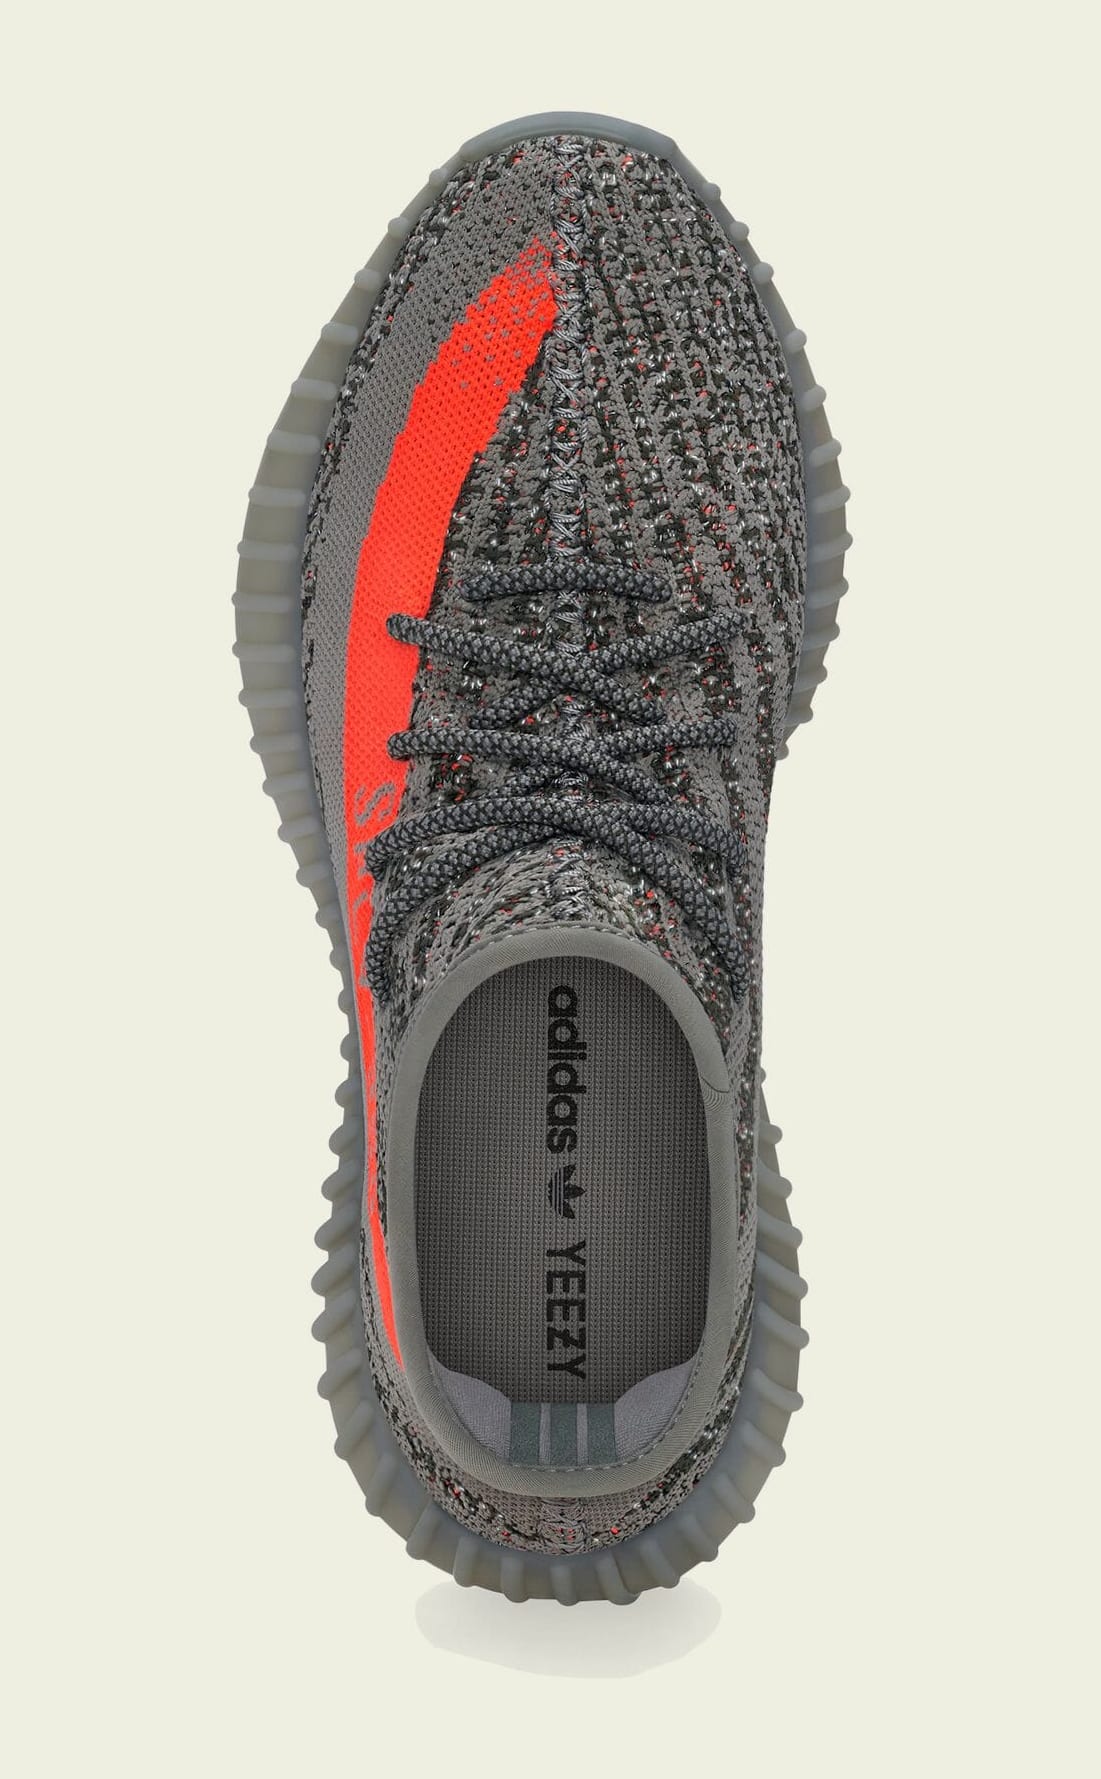 Adidas Yeezy Boost 350 V2 'Beluga Reflective' Release Date | Sole 